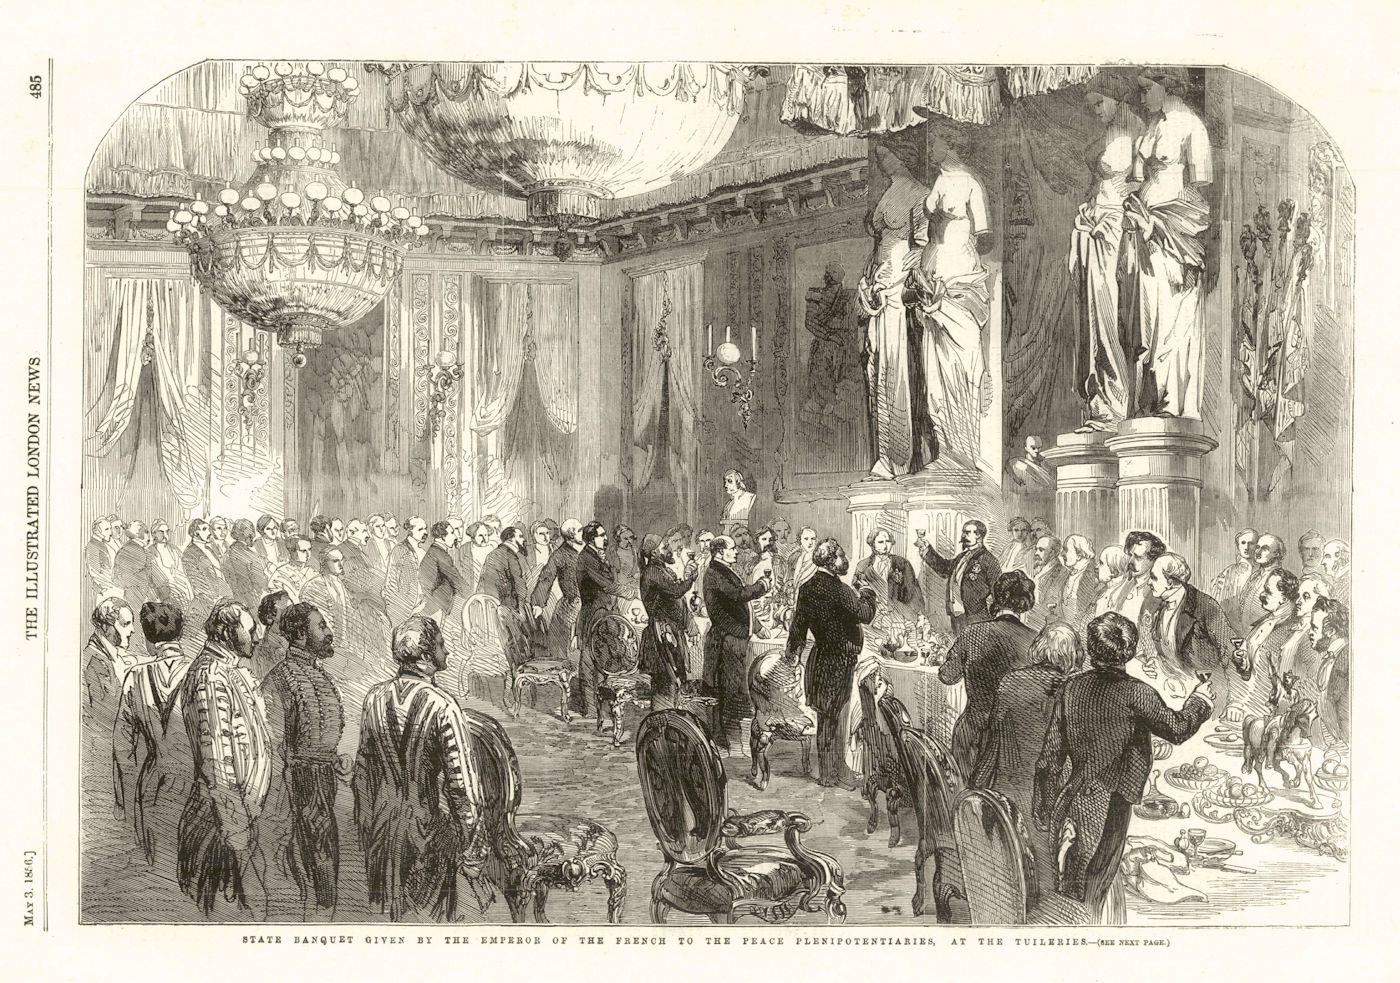 Associate Product Banquet French Emperor Peace Plenipotentiaries Tuileries. Paris 1856 old print